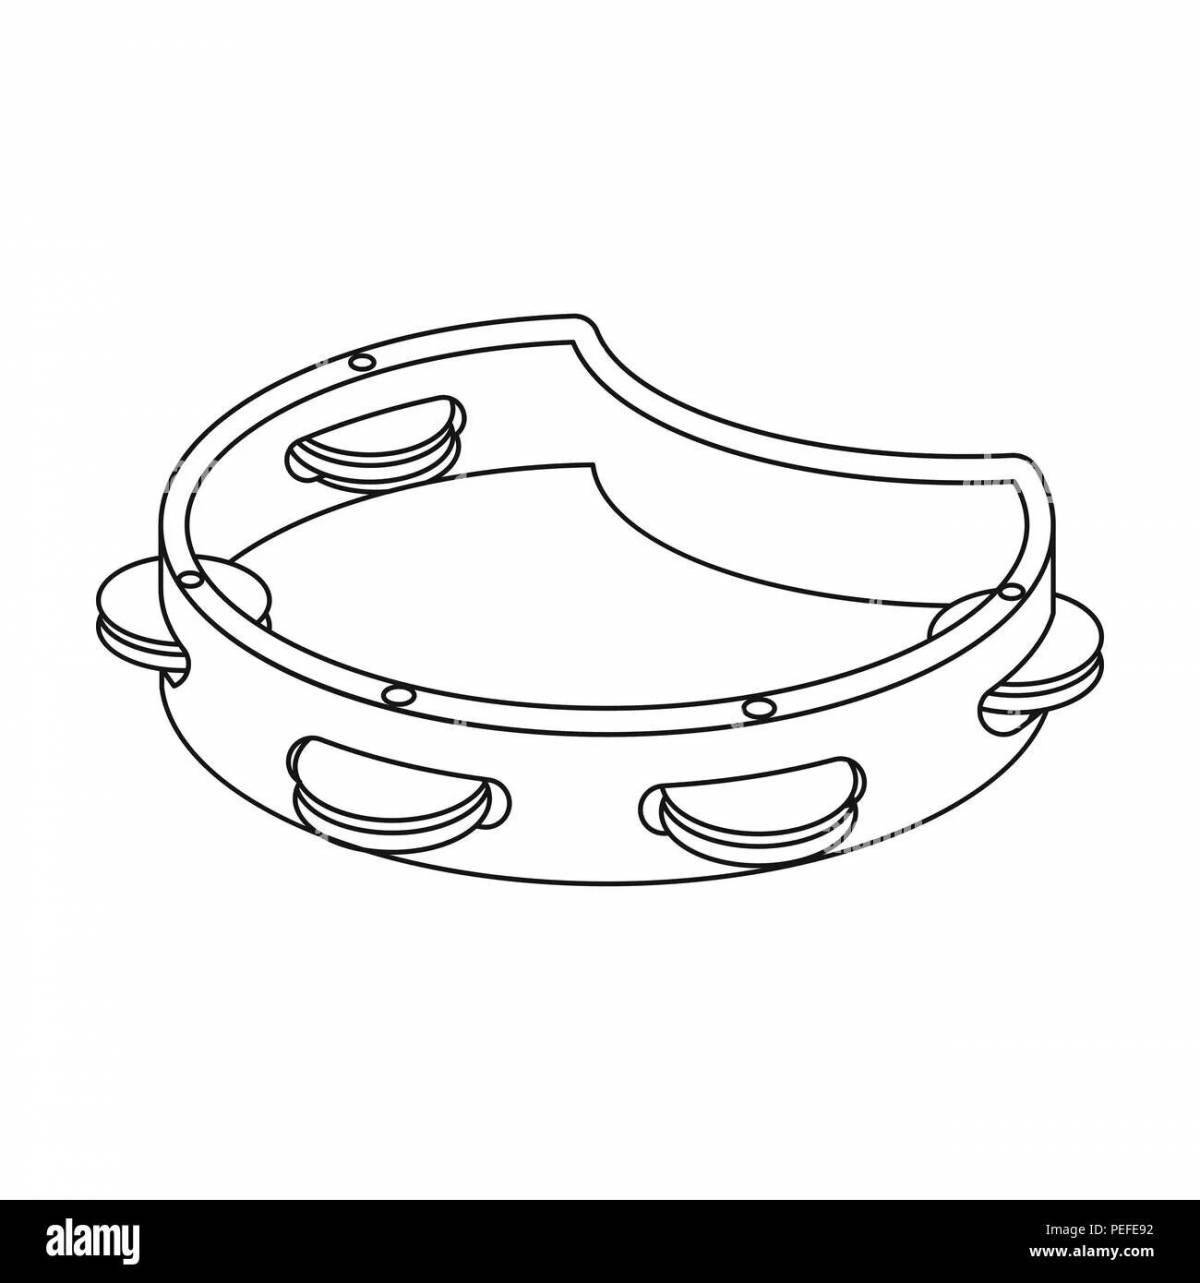 Charming tambourine coloring page